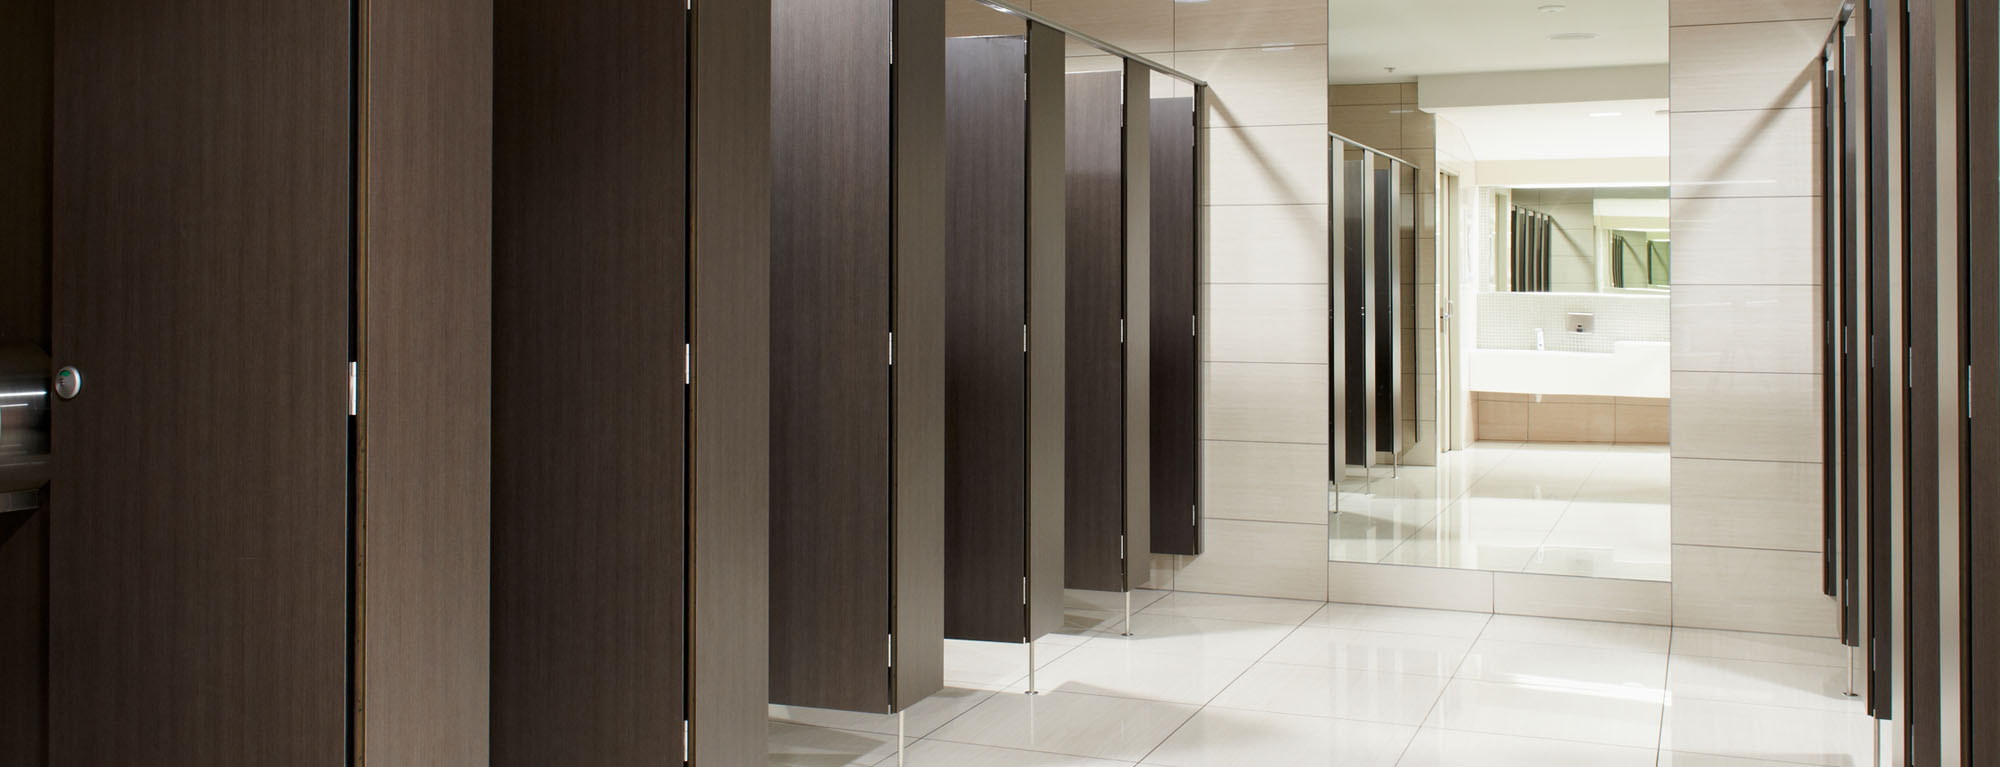 The Selection Of Toilet Partitions